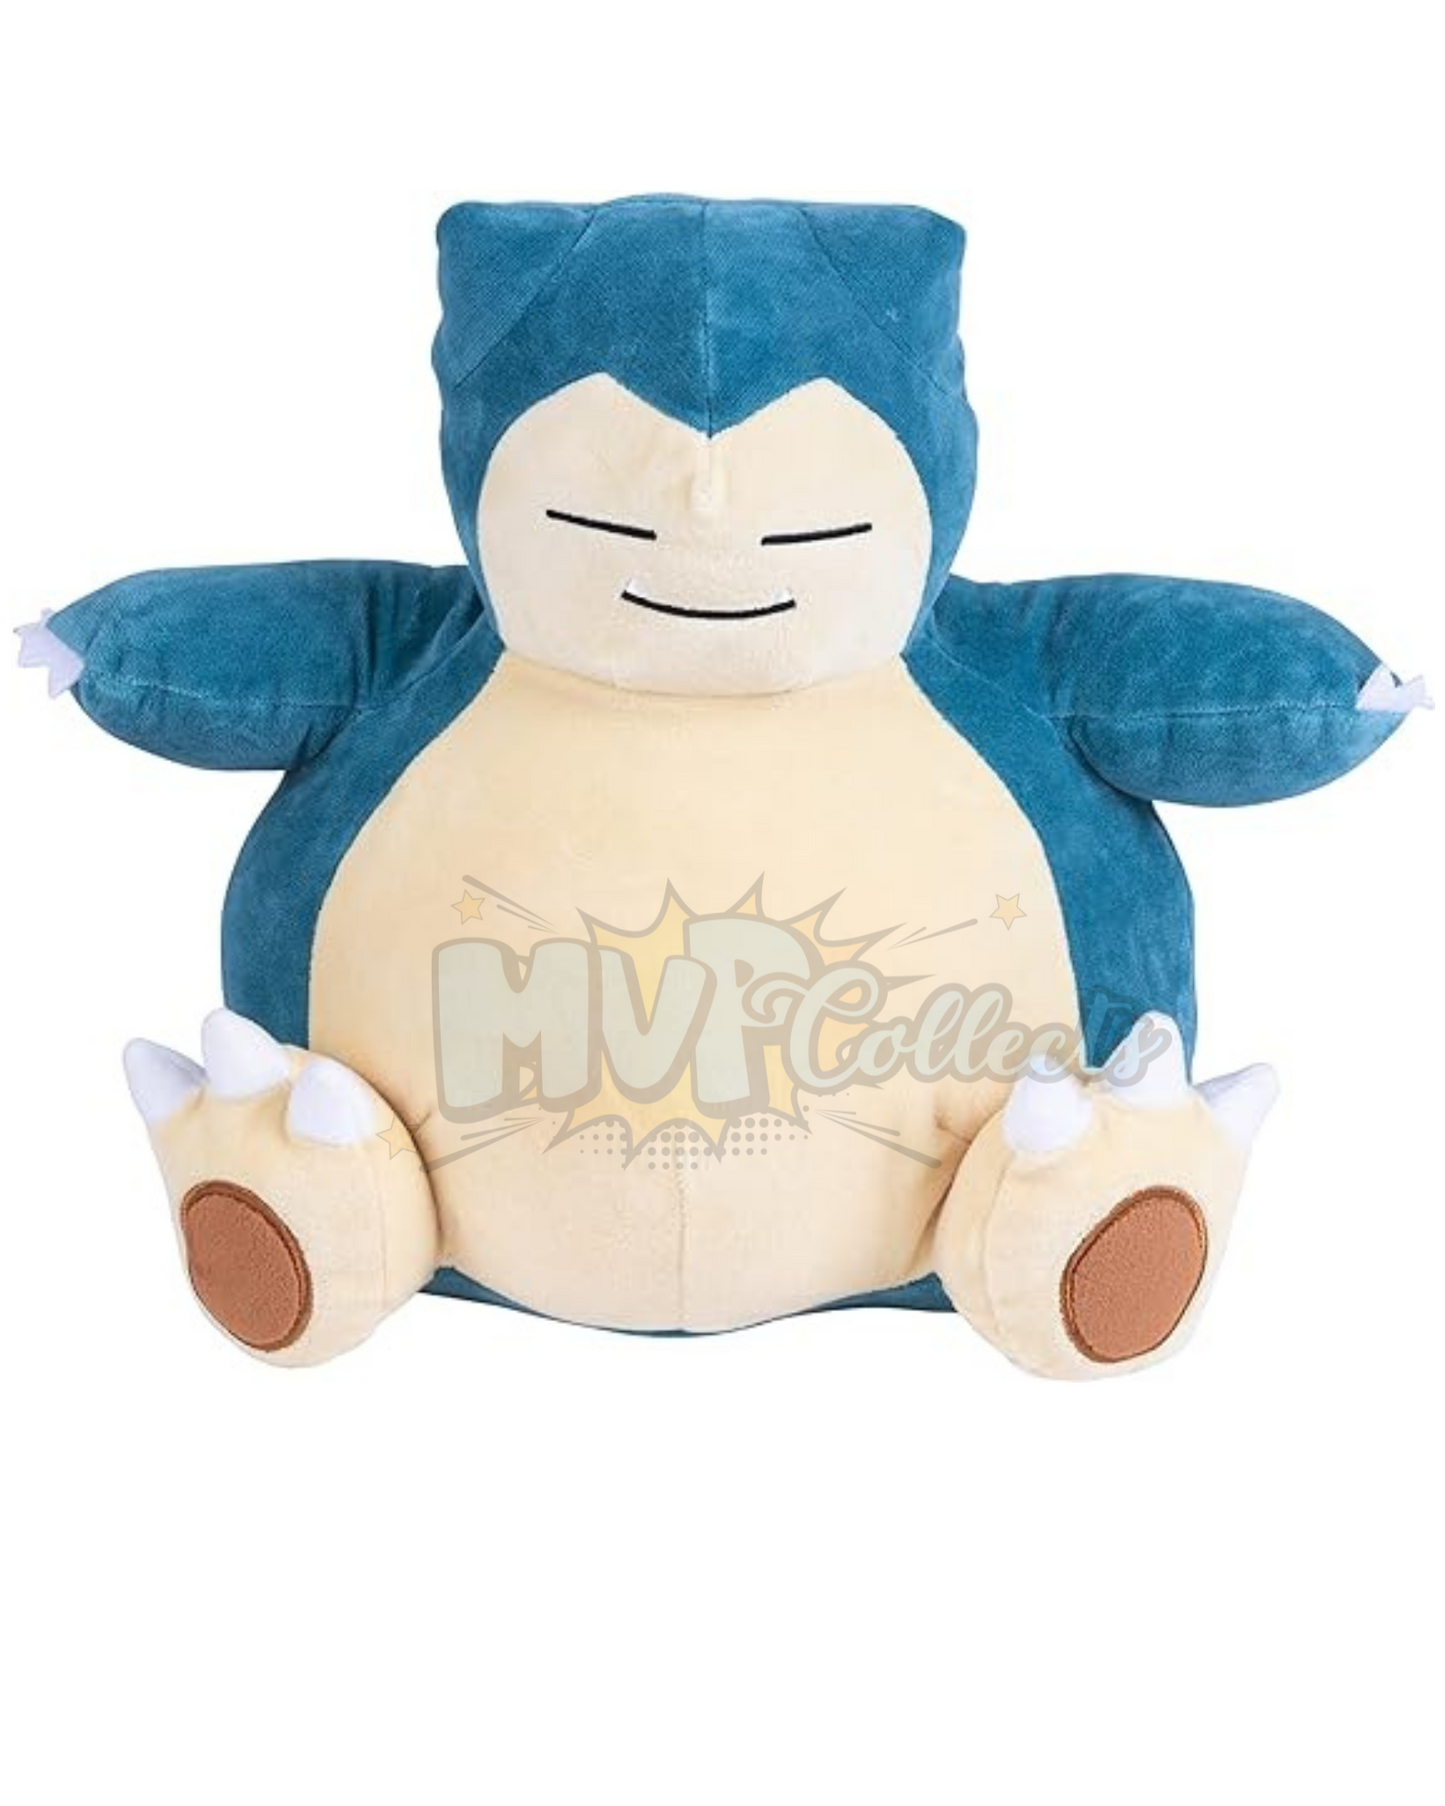 Pokémon 6” Plush Sleeping Snorlax - Cuddly Must Have Fans- Plush for Traveling, Car Rides, Nap Time, and Play Time